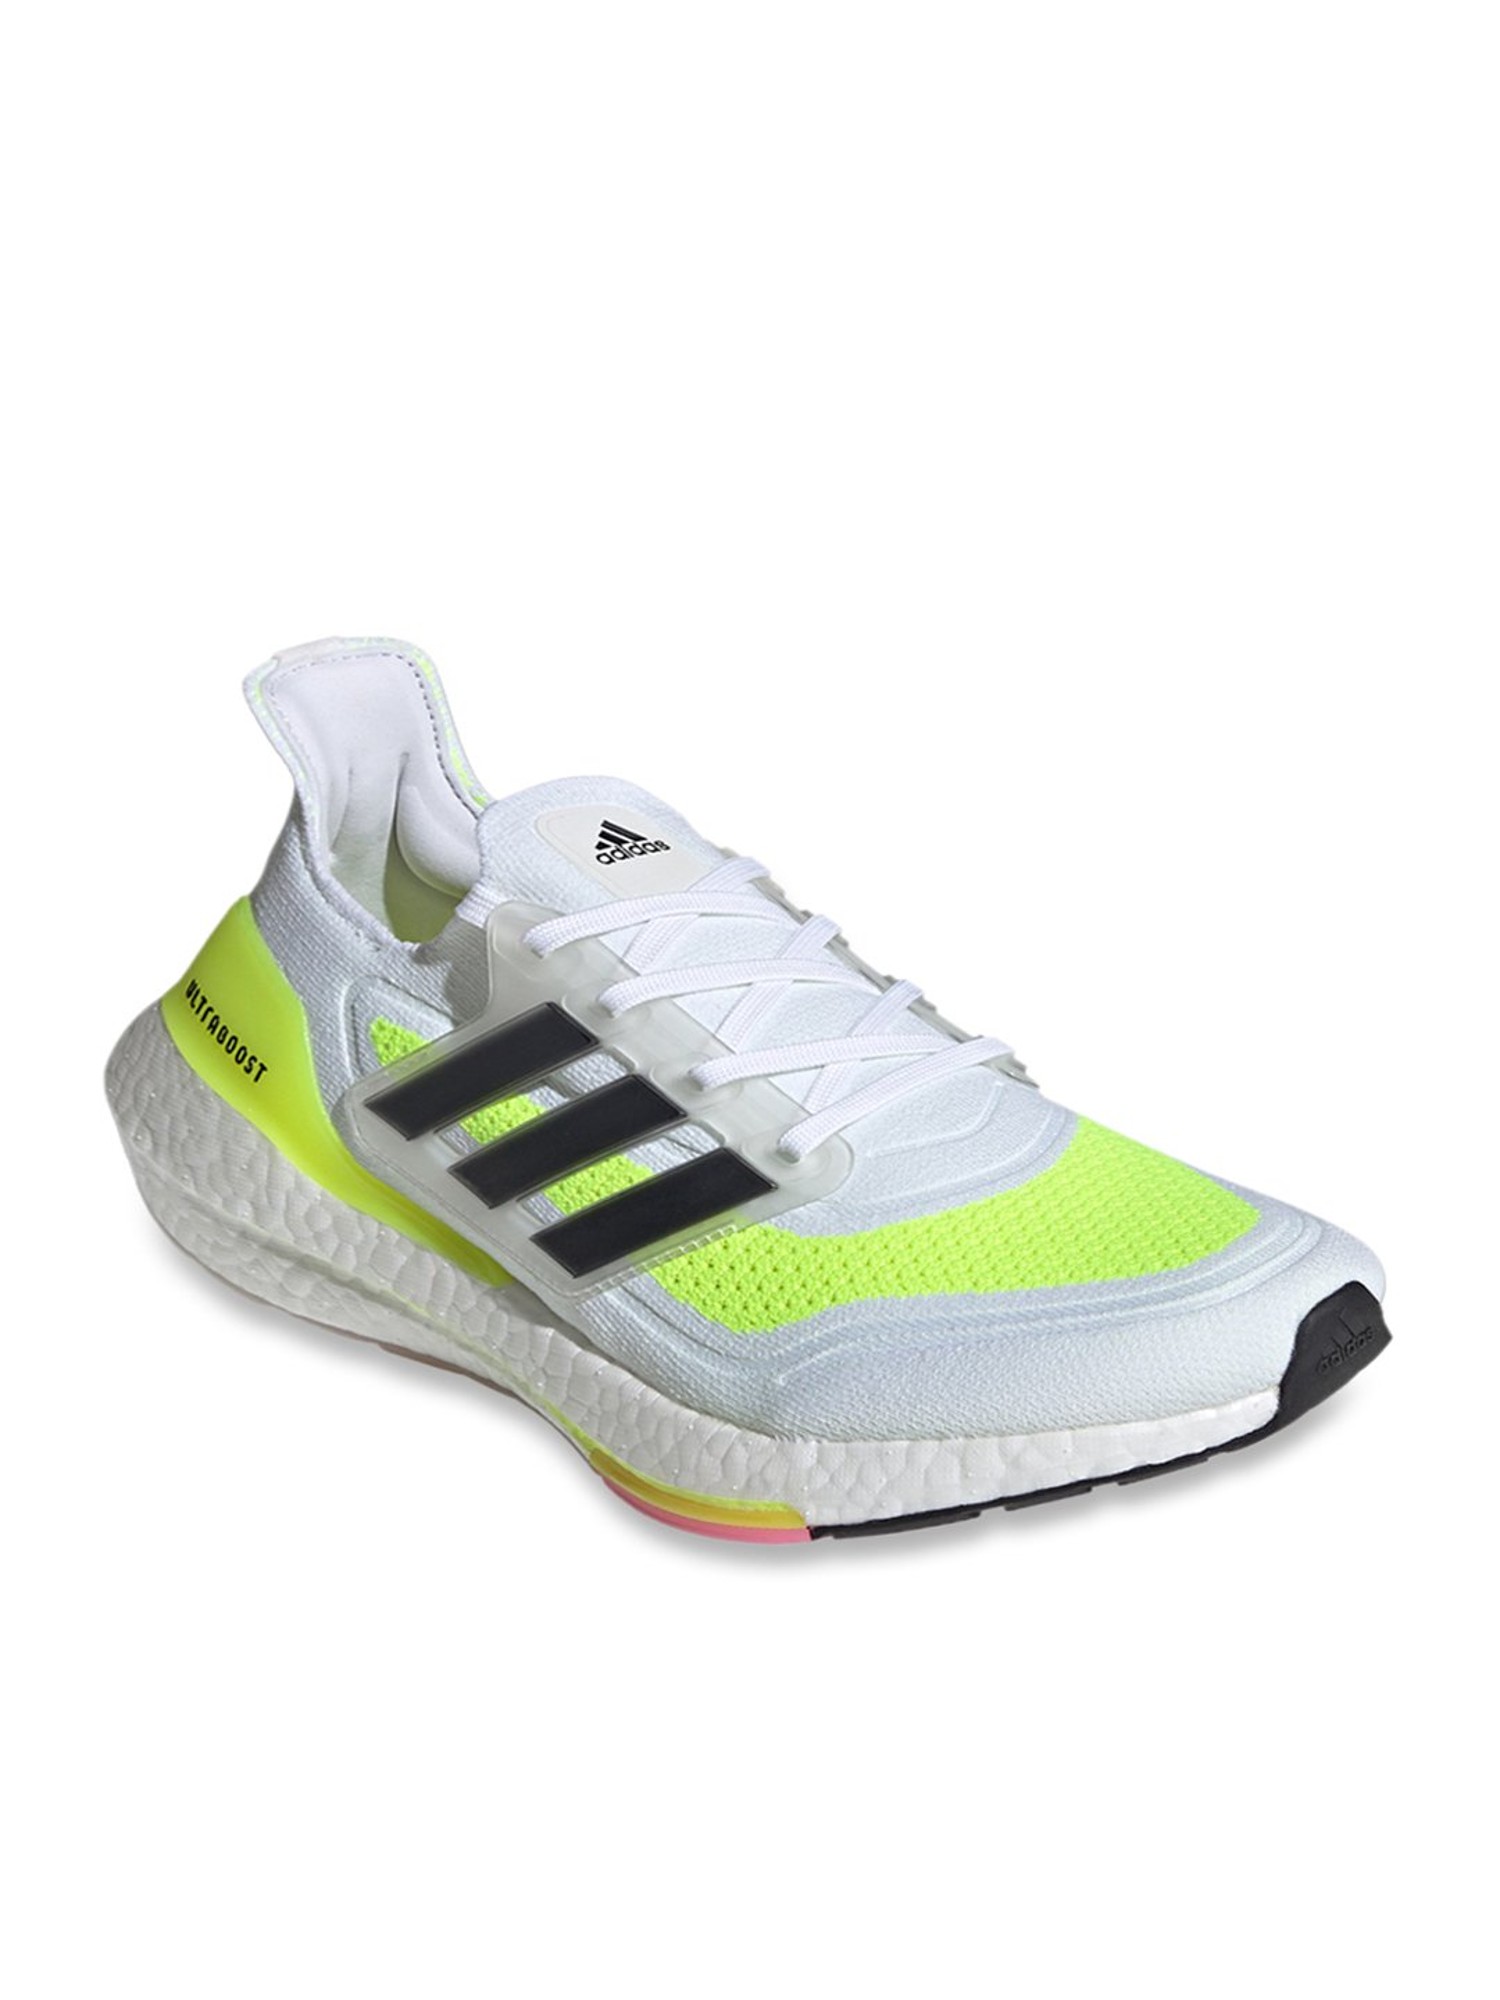 adidas energy boost online india